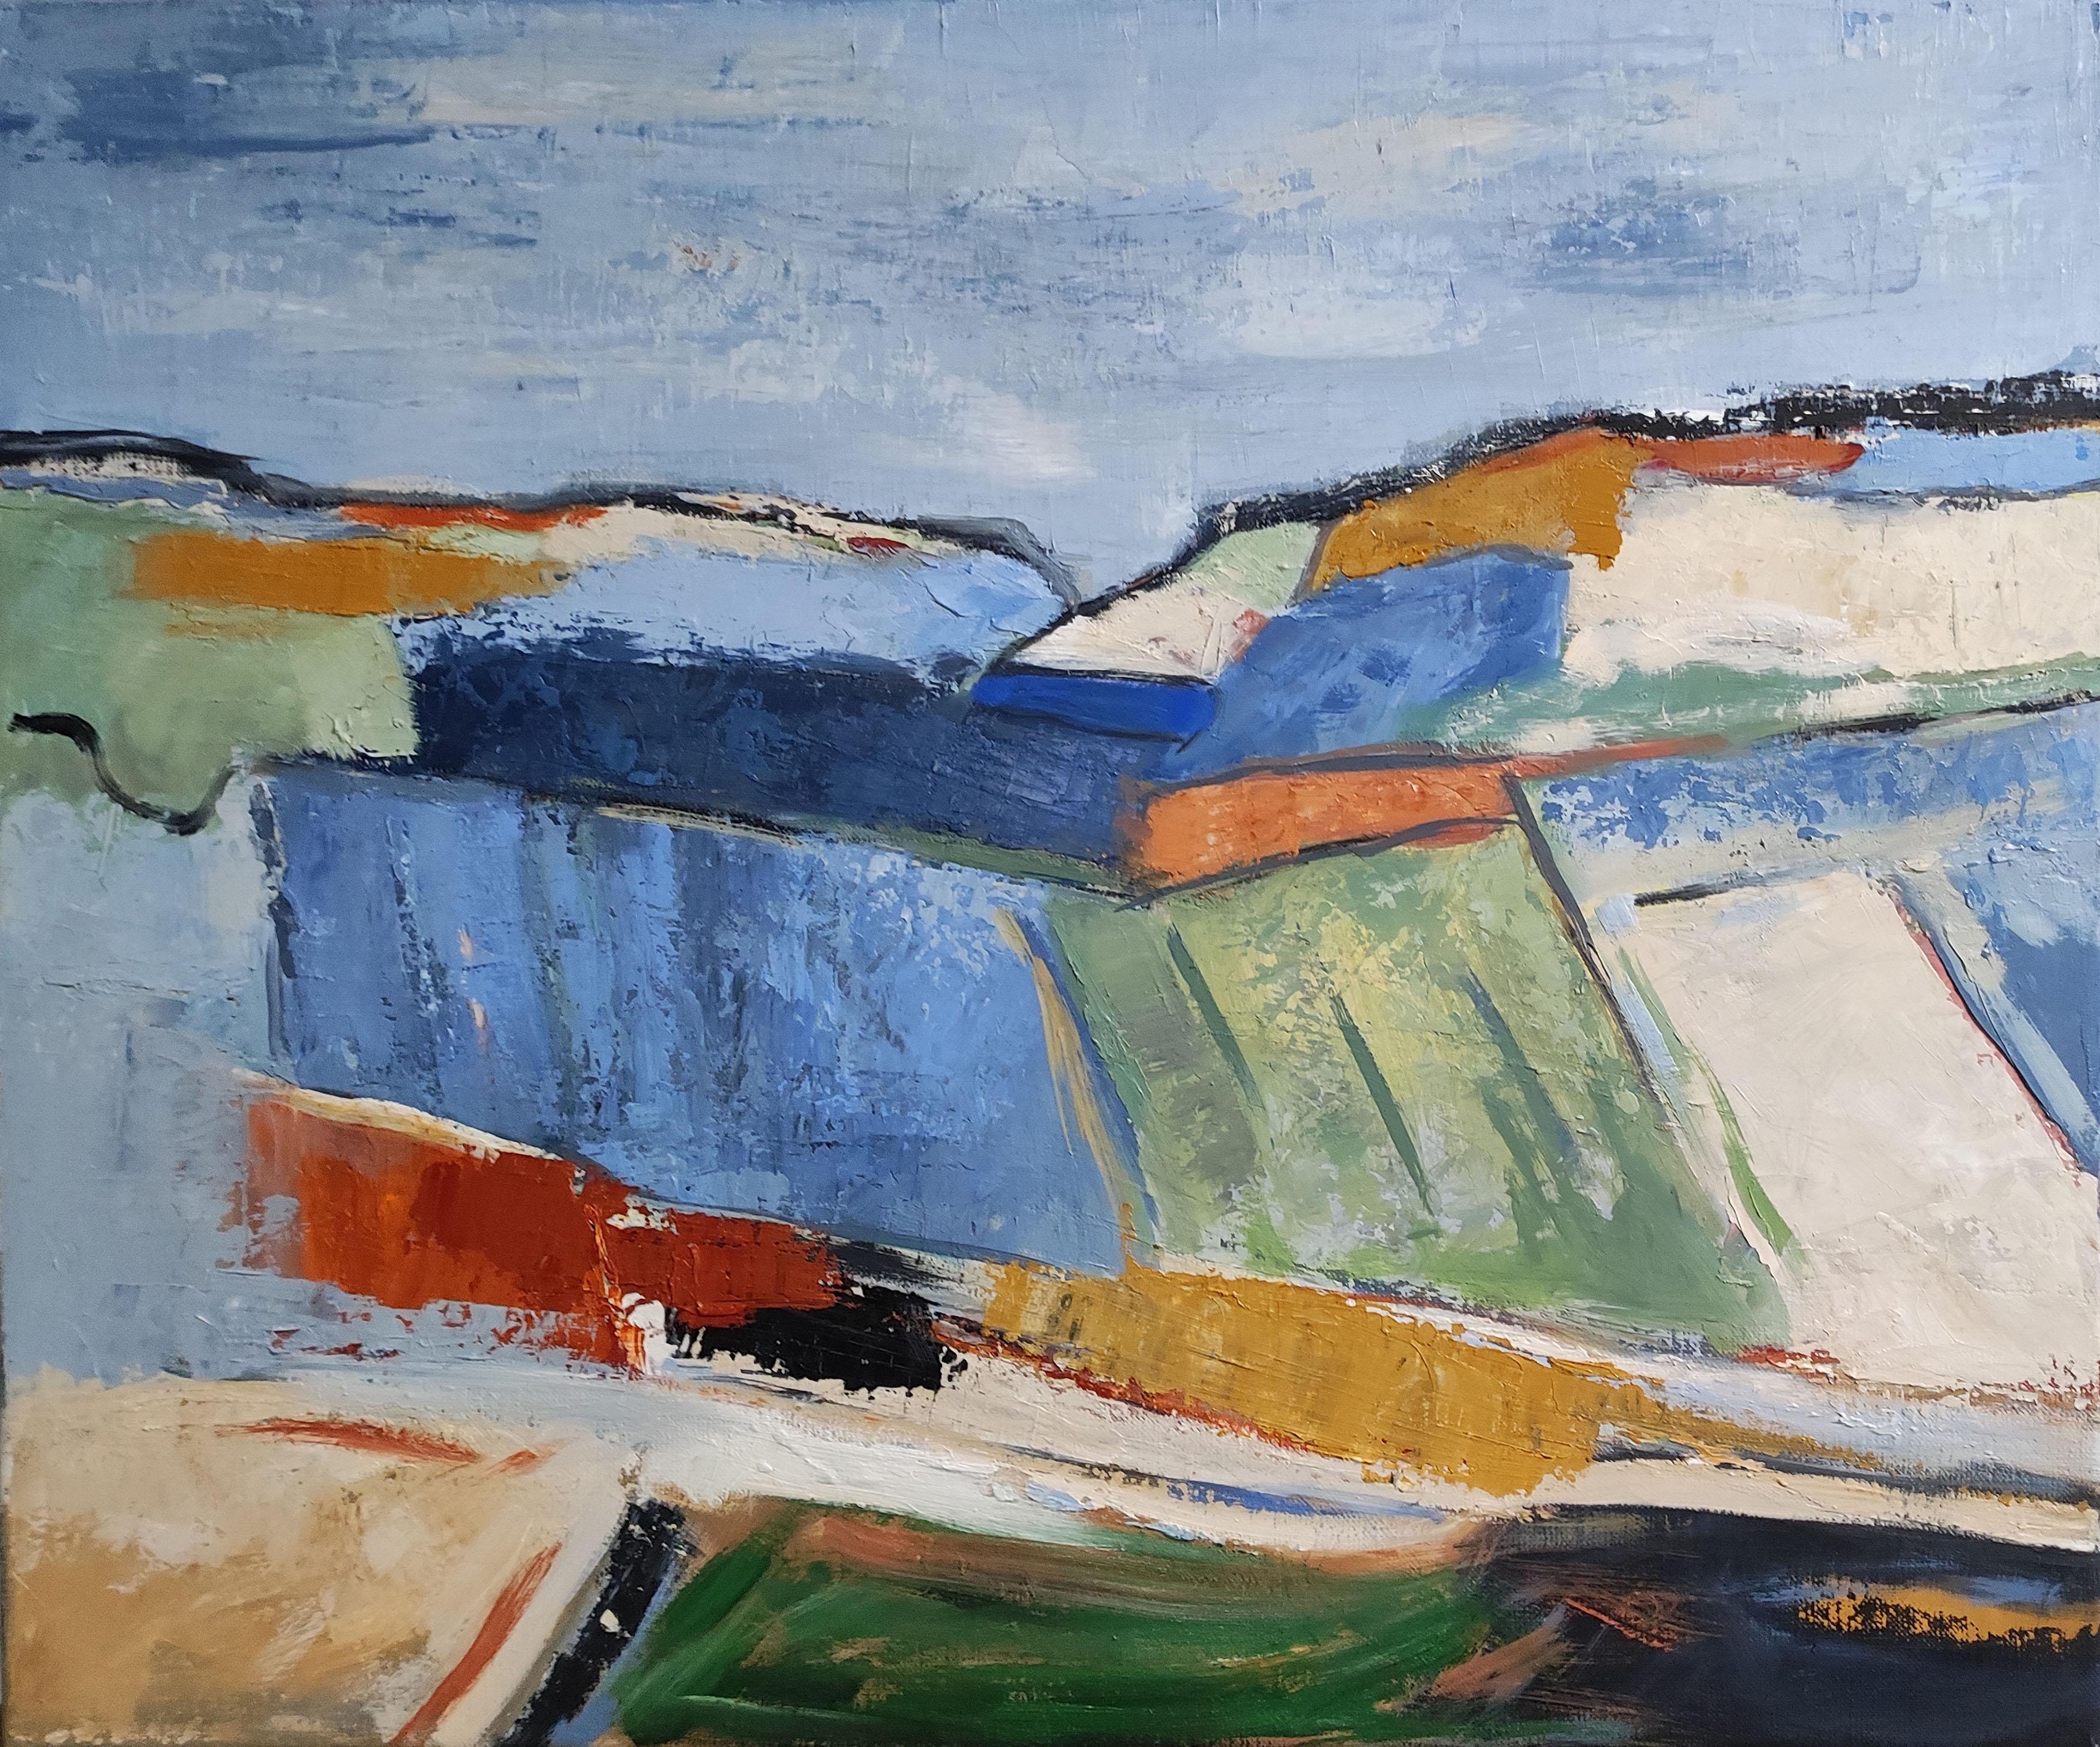 Geometric landscape, abstact, colored, oil on canvas,  texture, expressionism - Painting by SOPHIE DUMONT